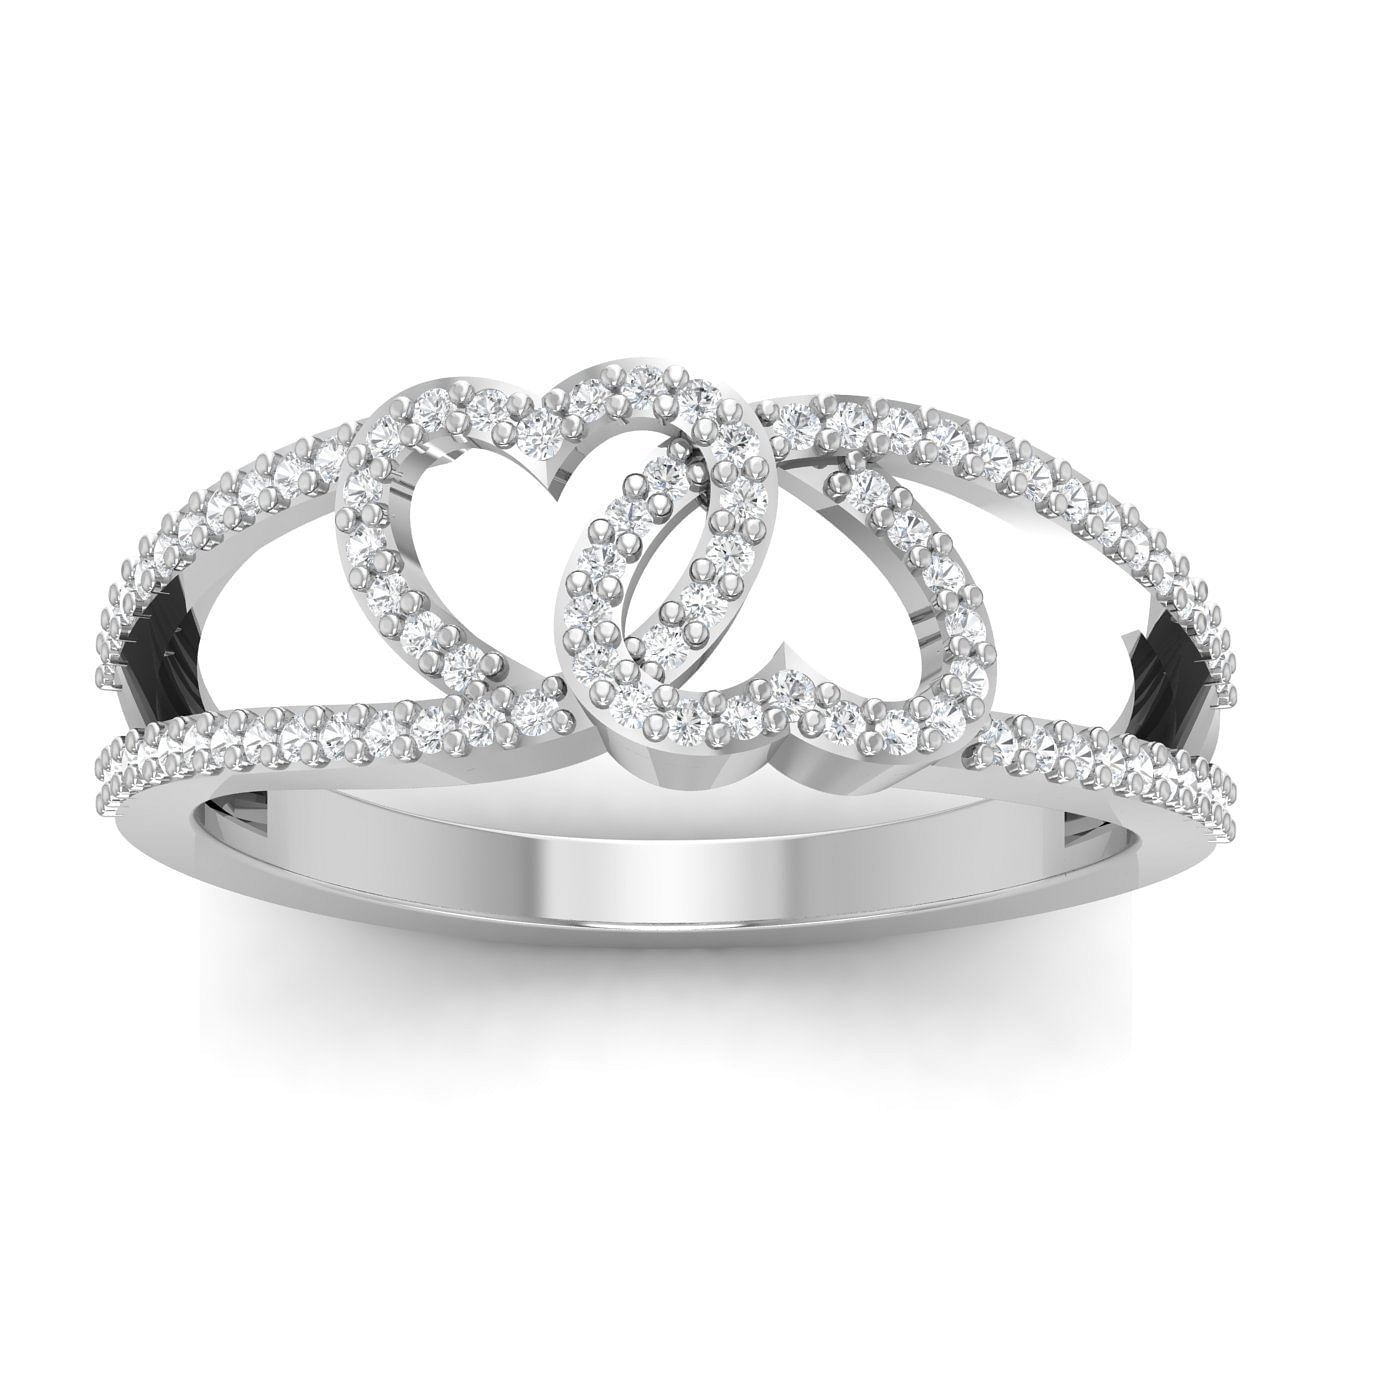 Merge Heart Wedding Ring With White Gold Metal